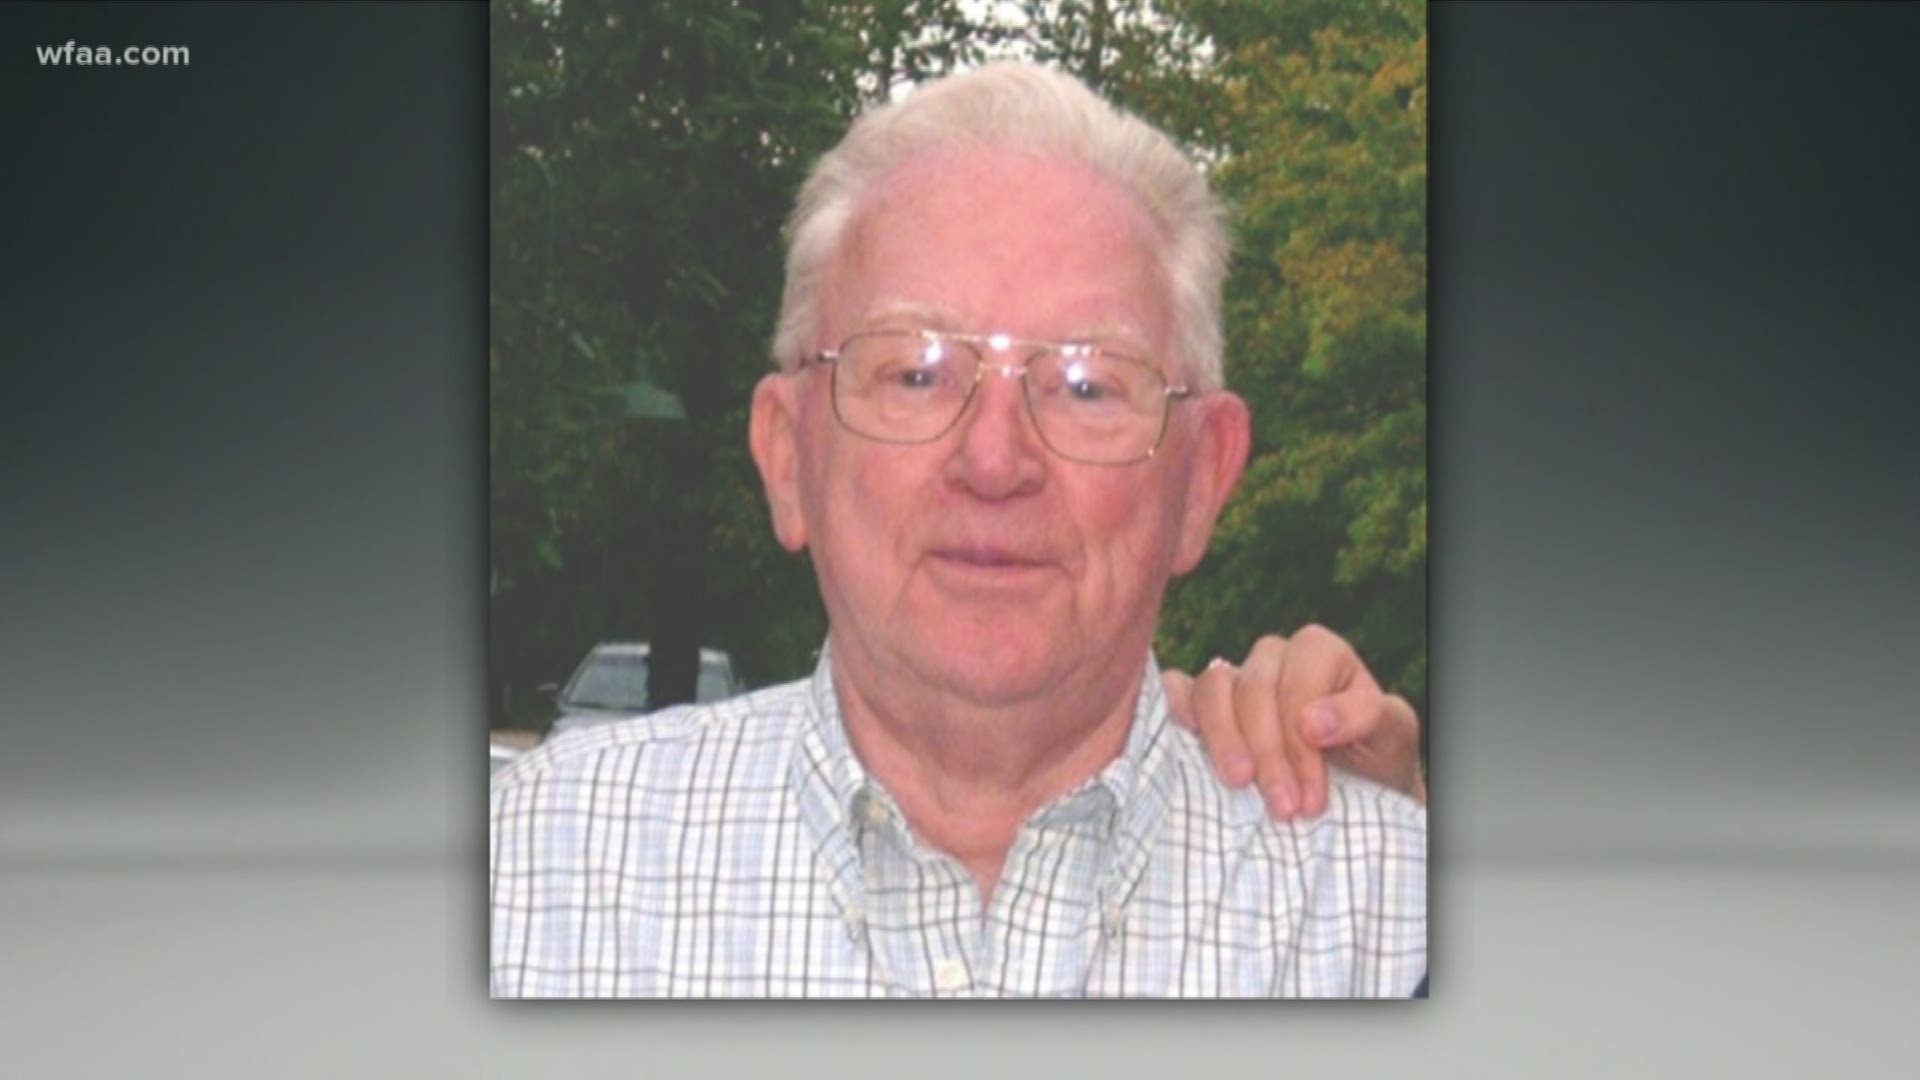 James Booth, 84, left his home last Wednesday and hasn't been seen from since.